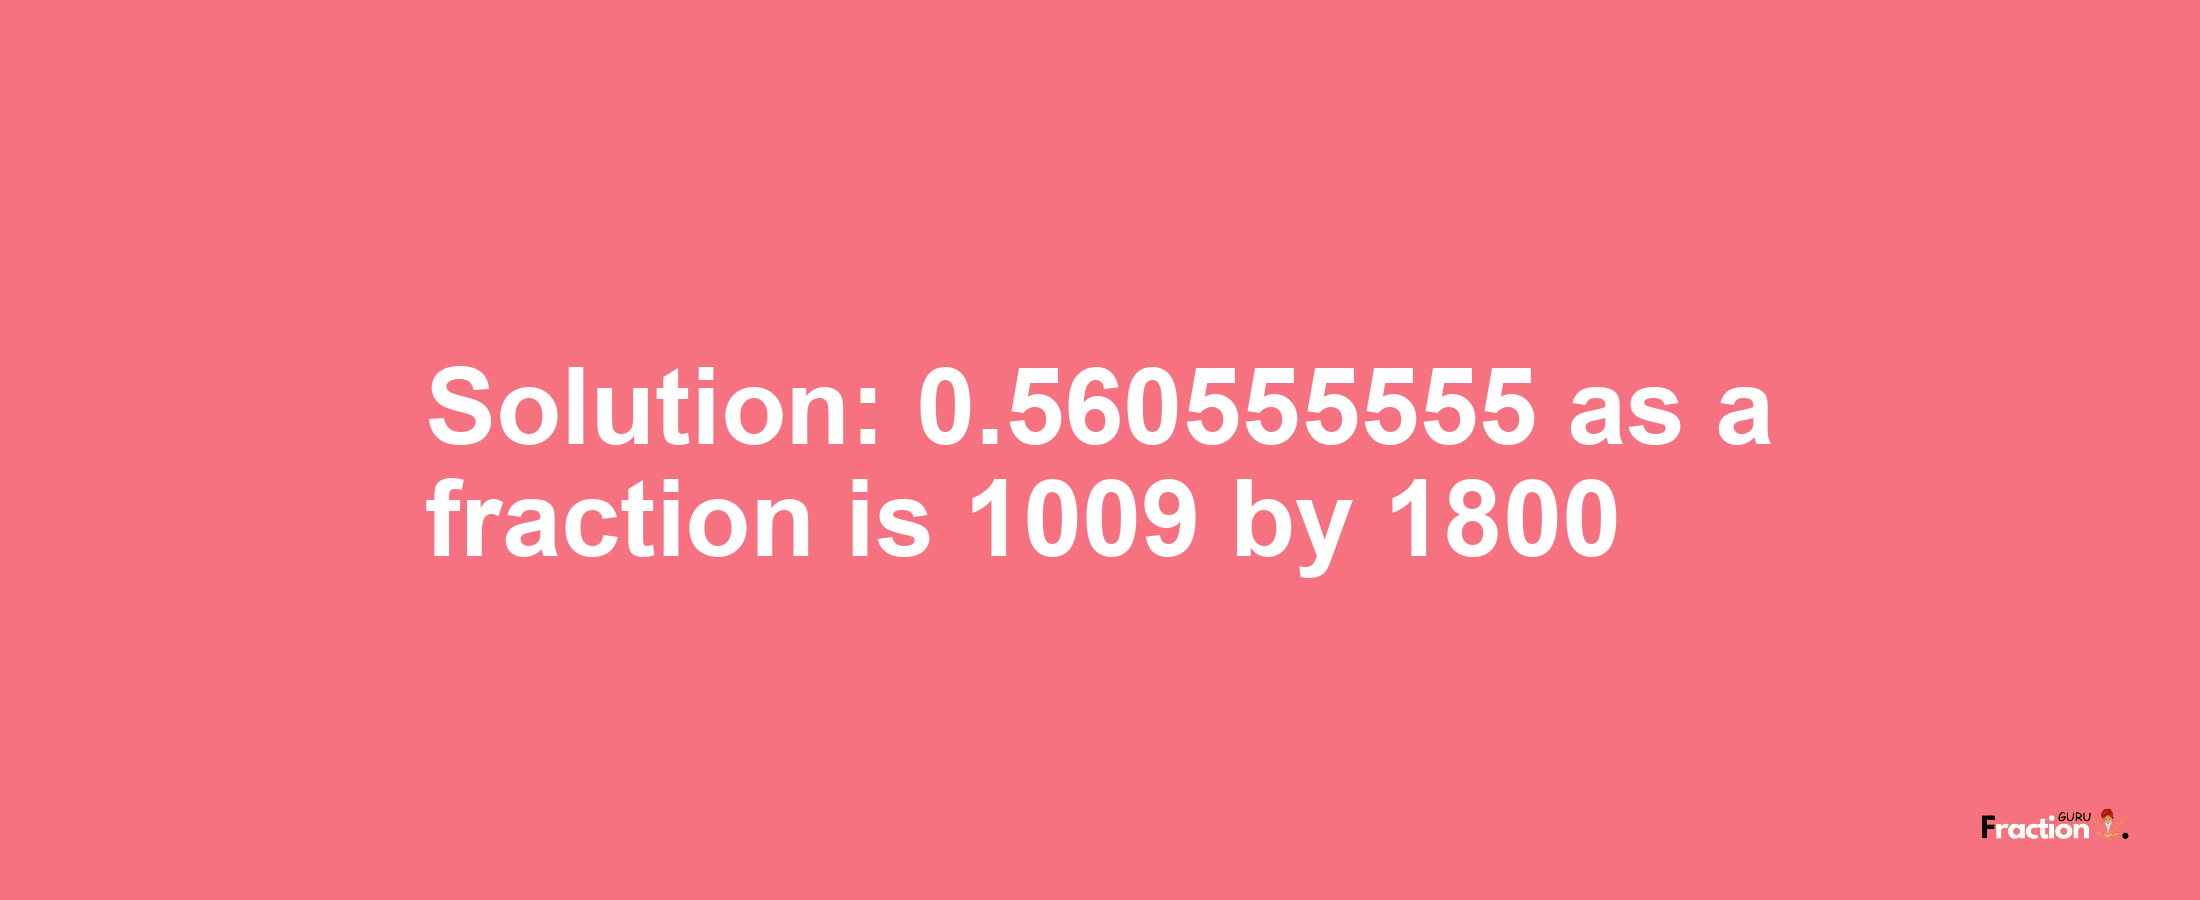 Solution:0.560555555 as a fraction is 1009/1800